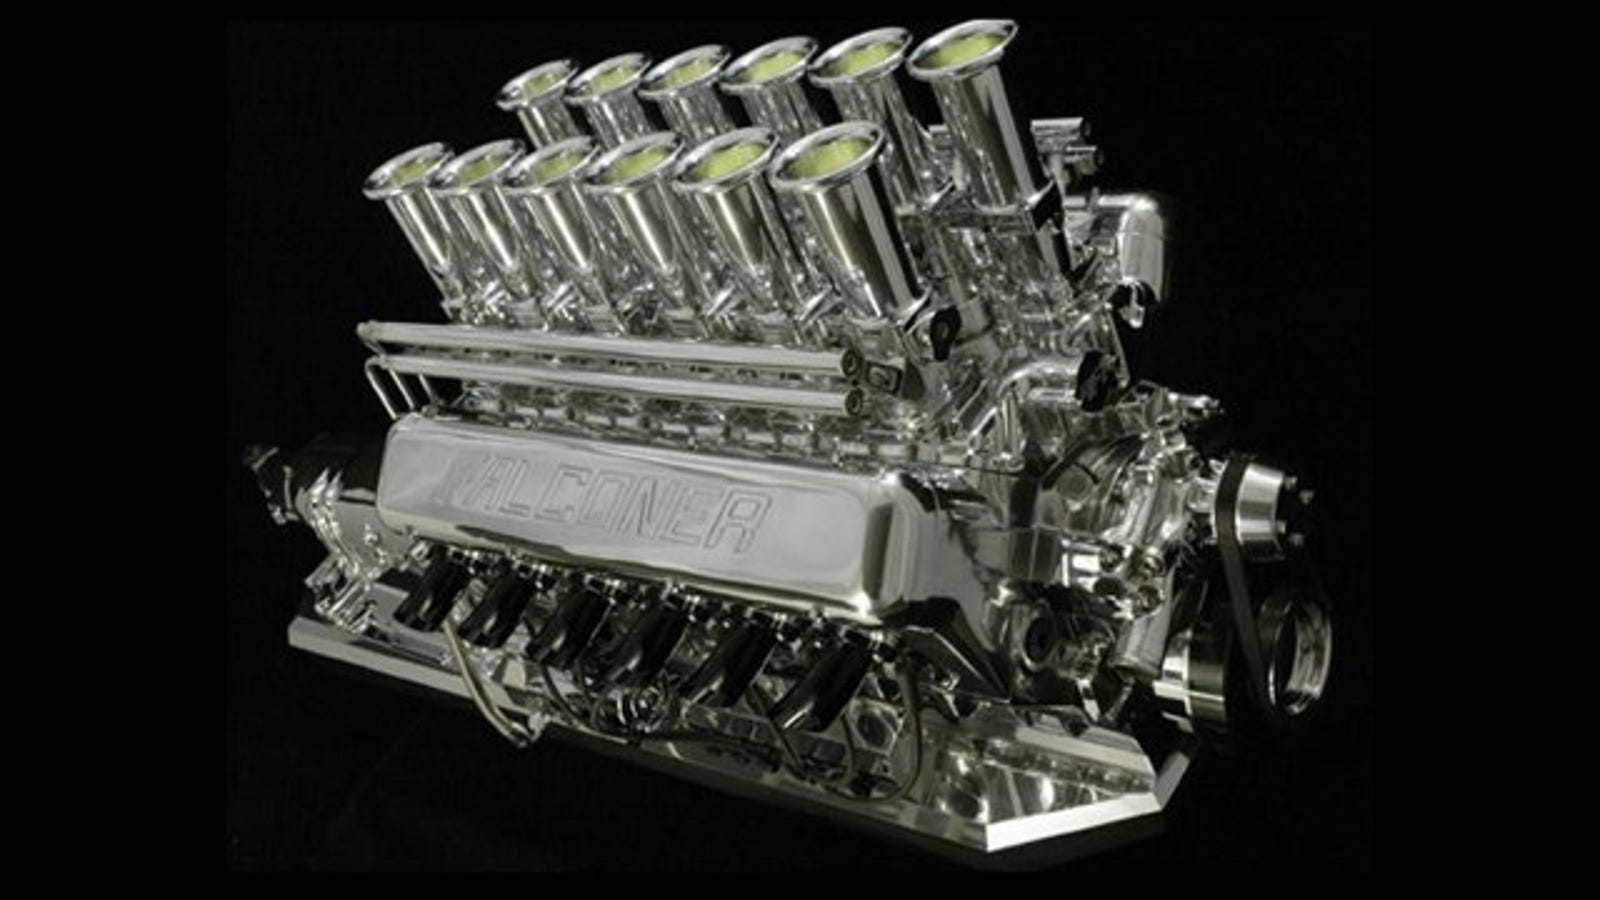 What's the most beautiful engine of all time?